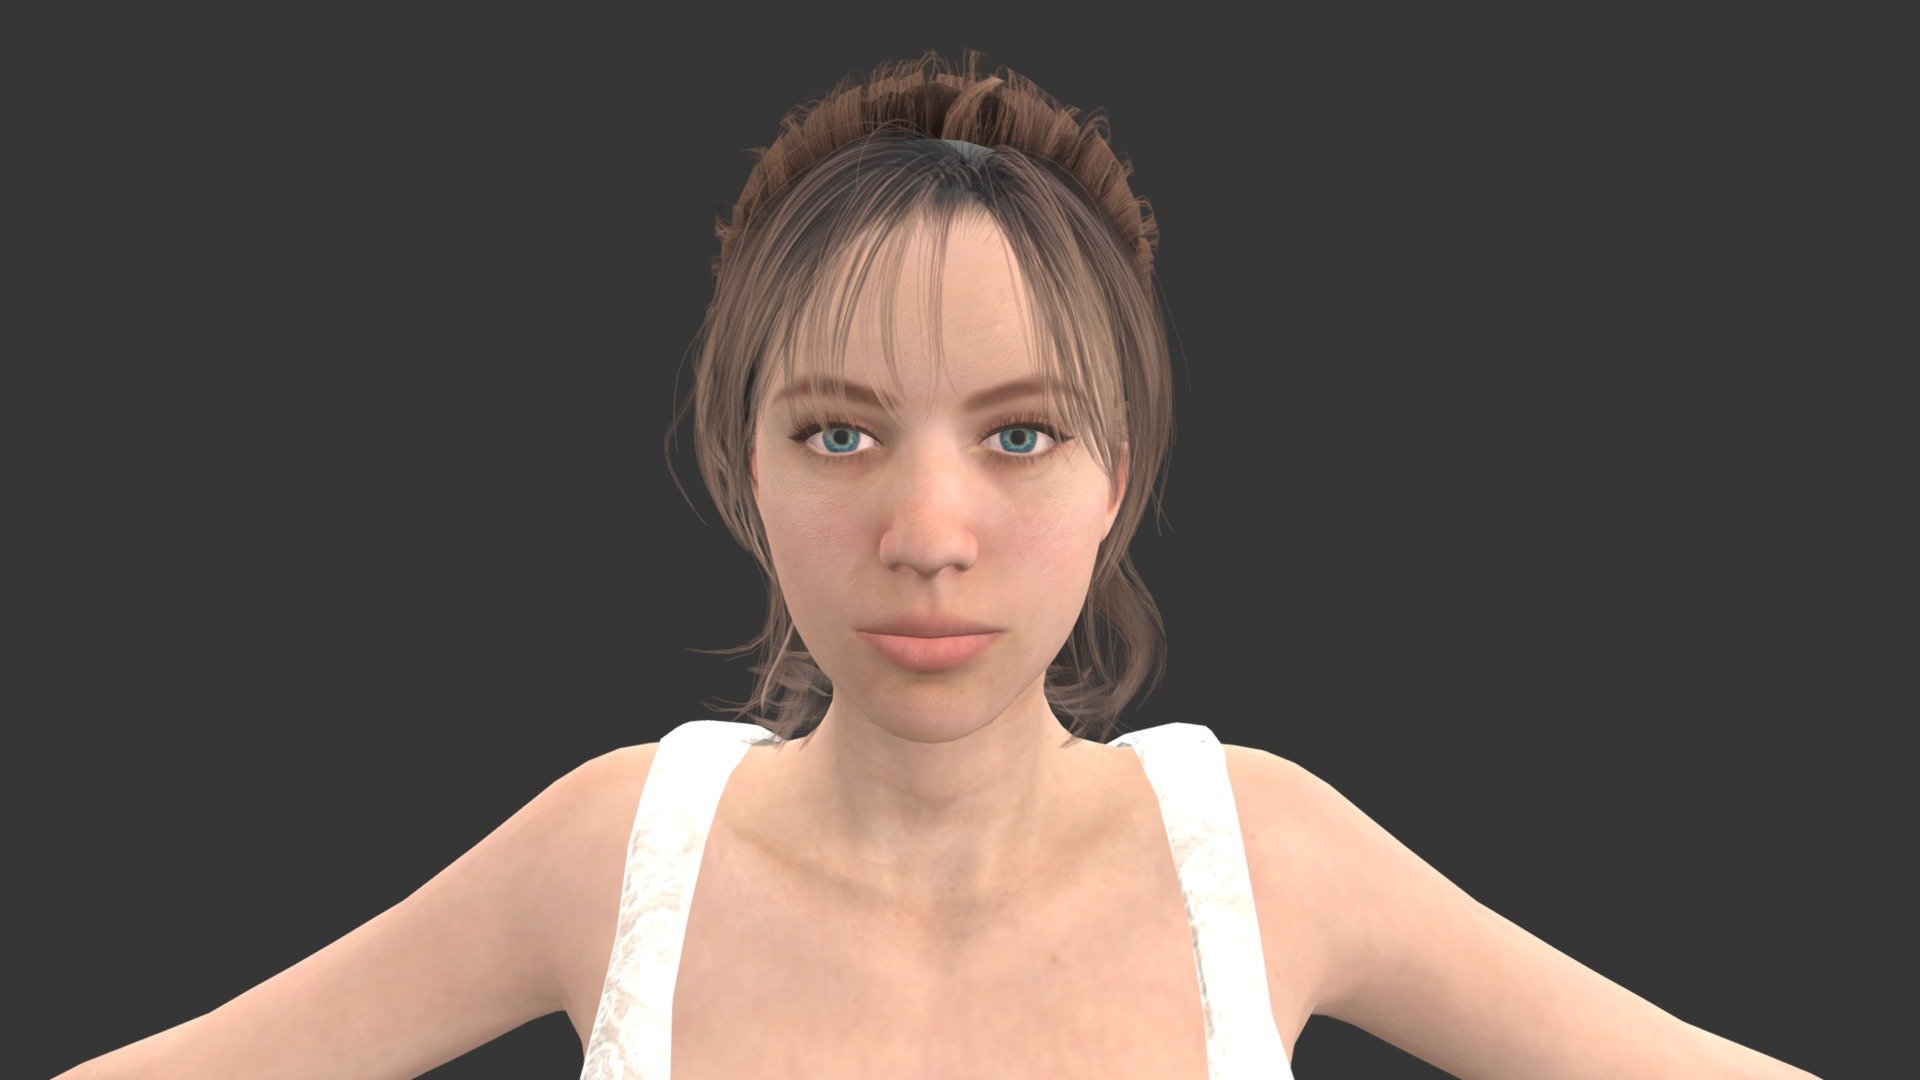 Realistic Female Character Model riged and Ready do Be Animated - Tina - 3D model by Peace Check Digital (@peacecheck1) 3d model